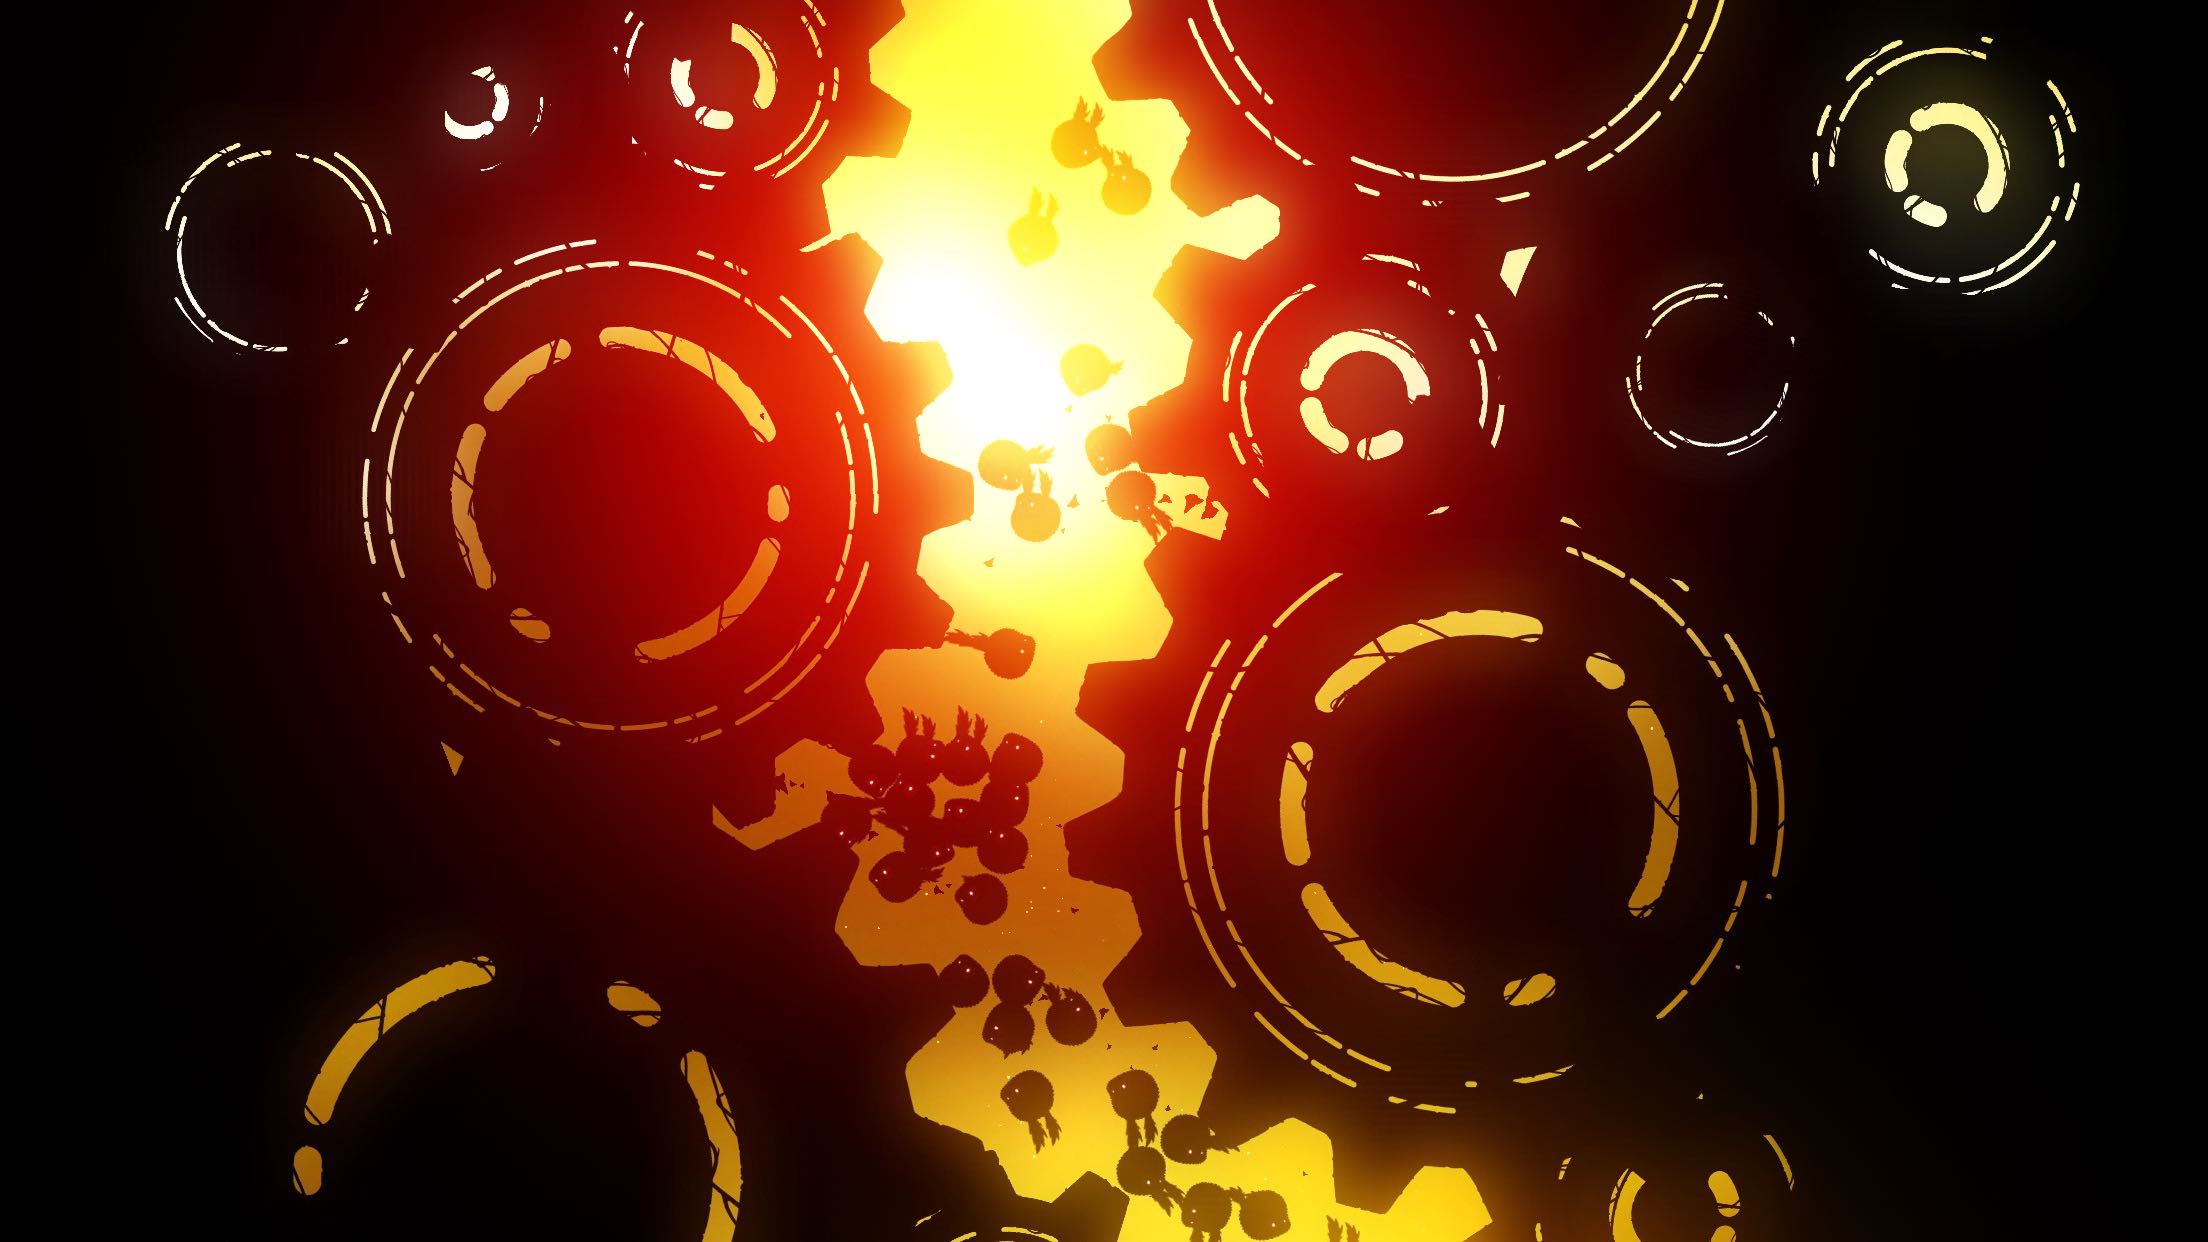 Frogmind released Badland 2 for iOS